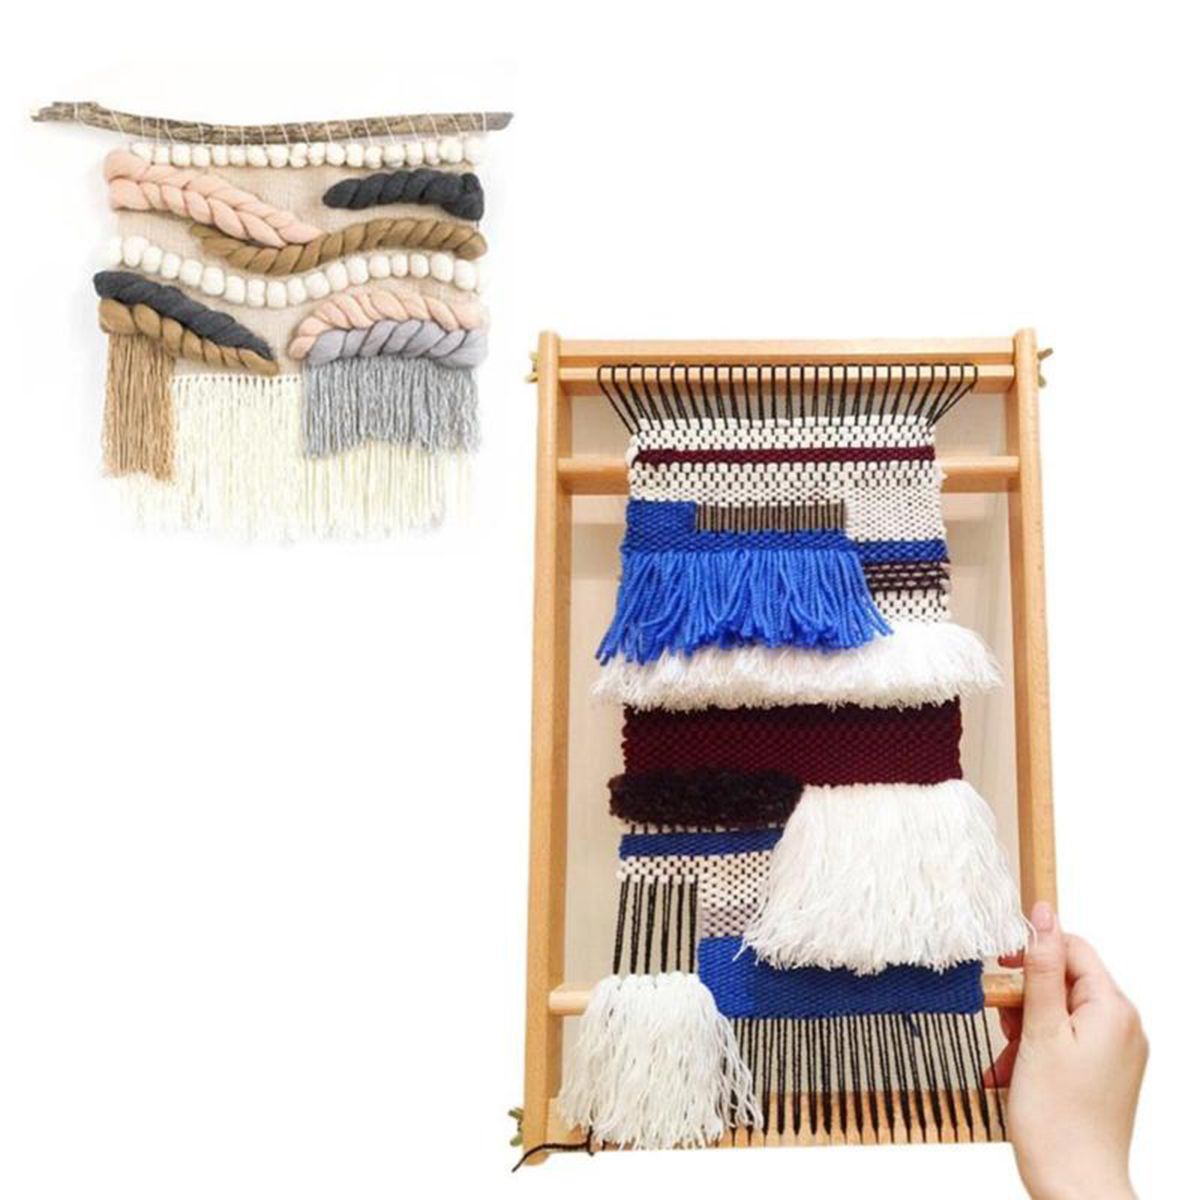 DIY-Traditional-Wooden-Weaving-Loom-Machine-Pretend-Play-Toys-Kids-Knitting-Craft-1496366